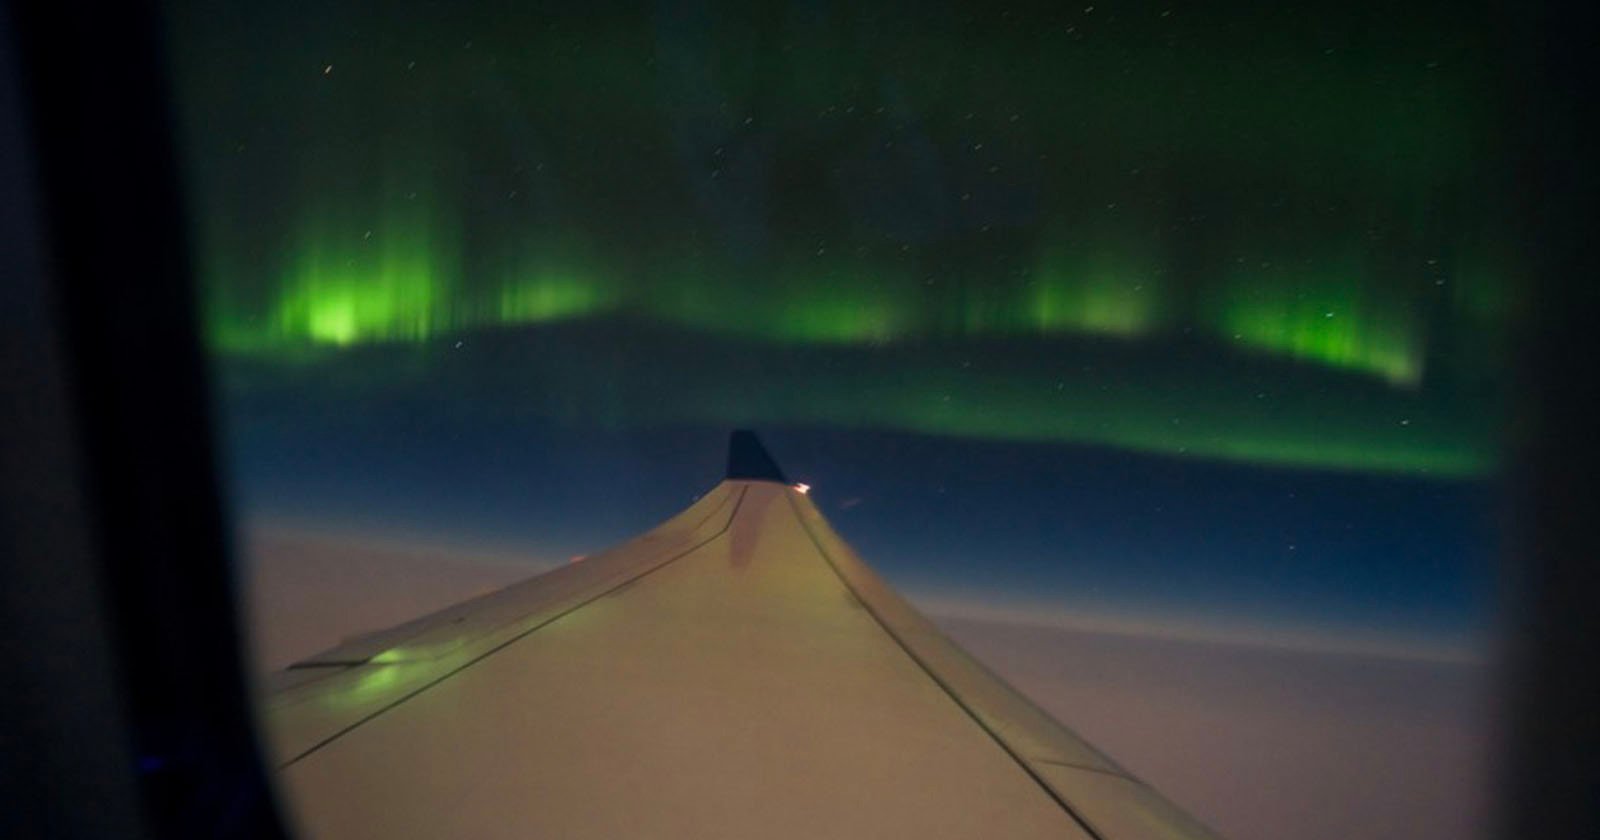 Olympic Athlete Captures Impressive Photo of Northern Lights from